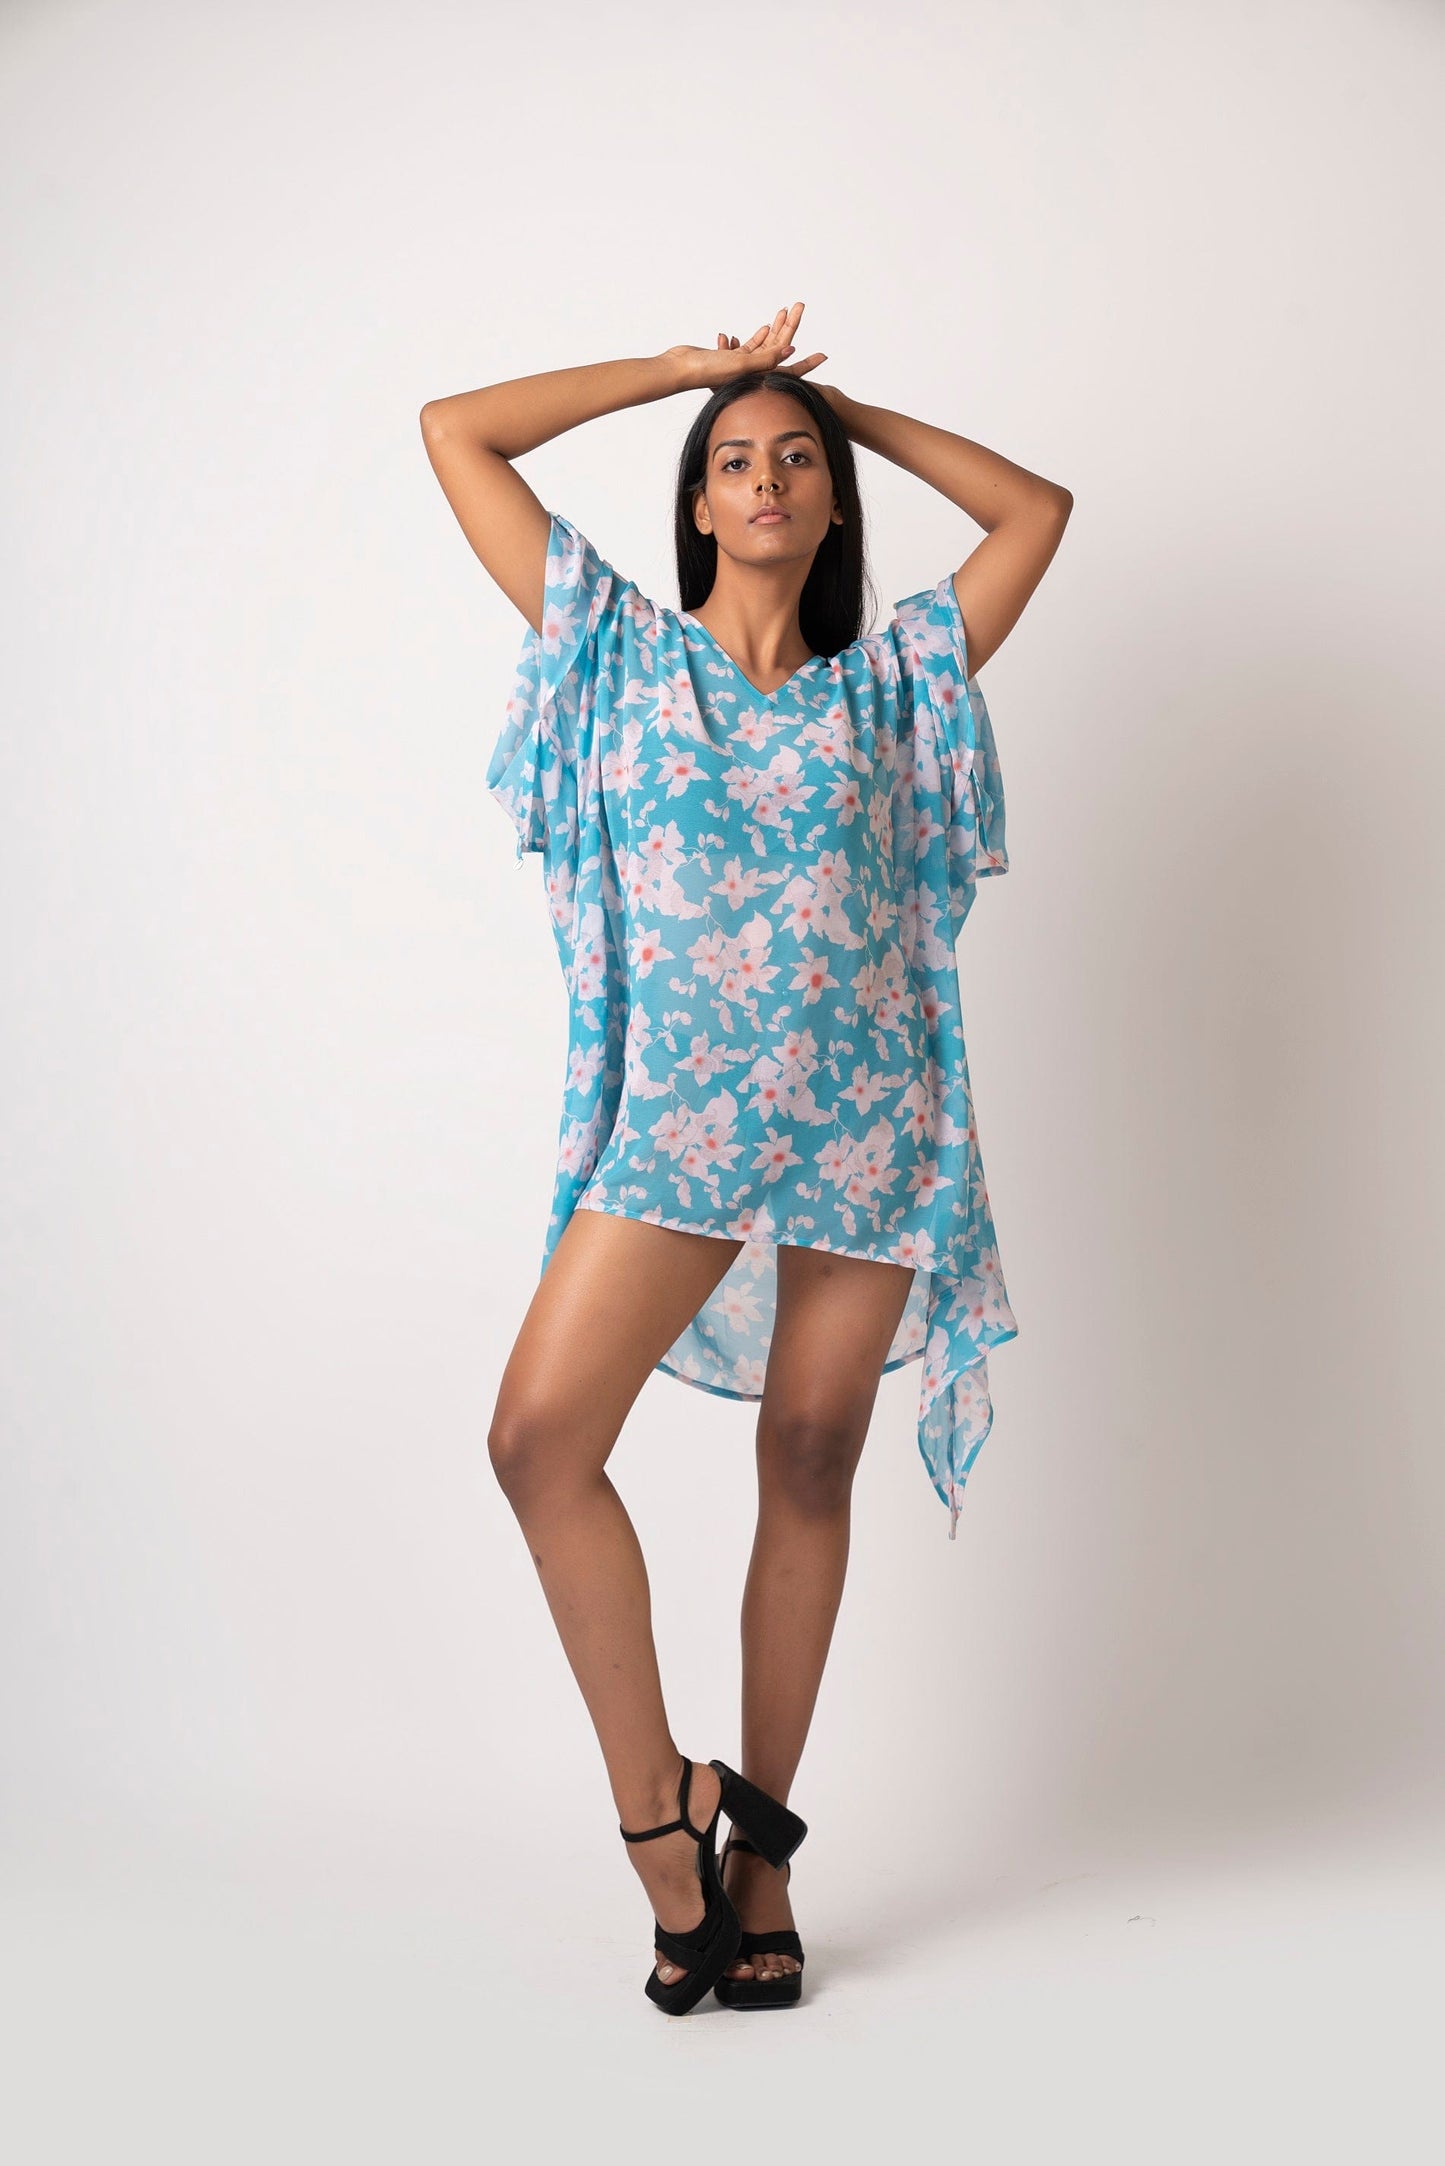 Flowy georgette beach vacation dress featuring distinctive slit sleeves and sea shell accents. Can be worn as a kimono or a mini dress